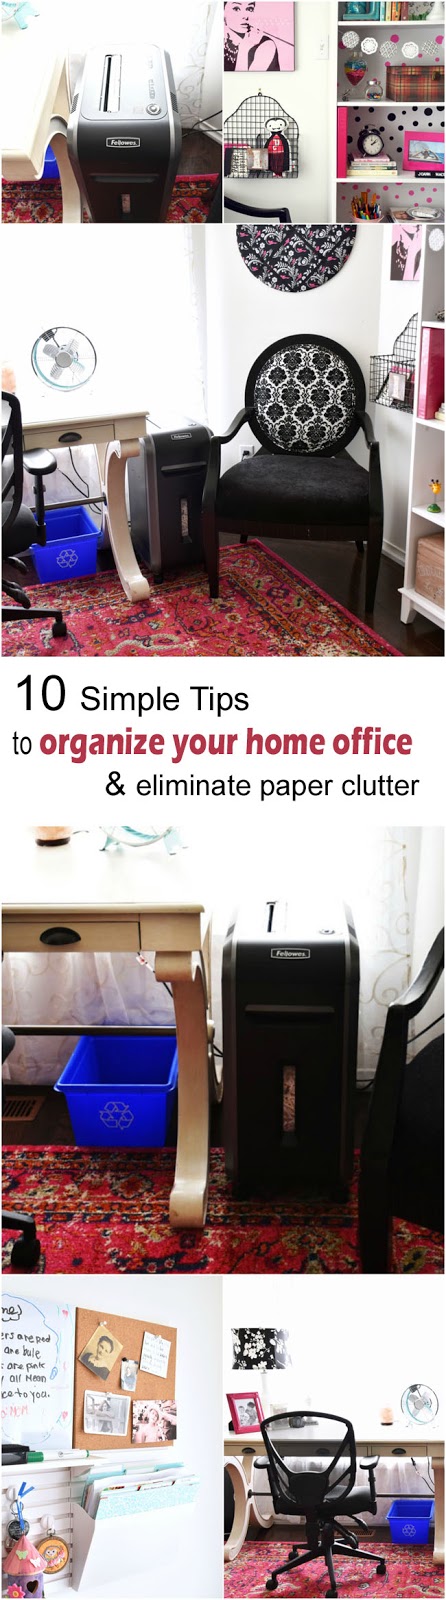 Paper piling up? Read these 10 simple tips to get your home office organized & eliminate paper clutter once and for all!